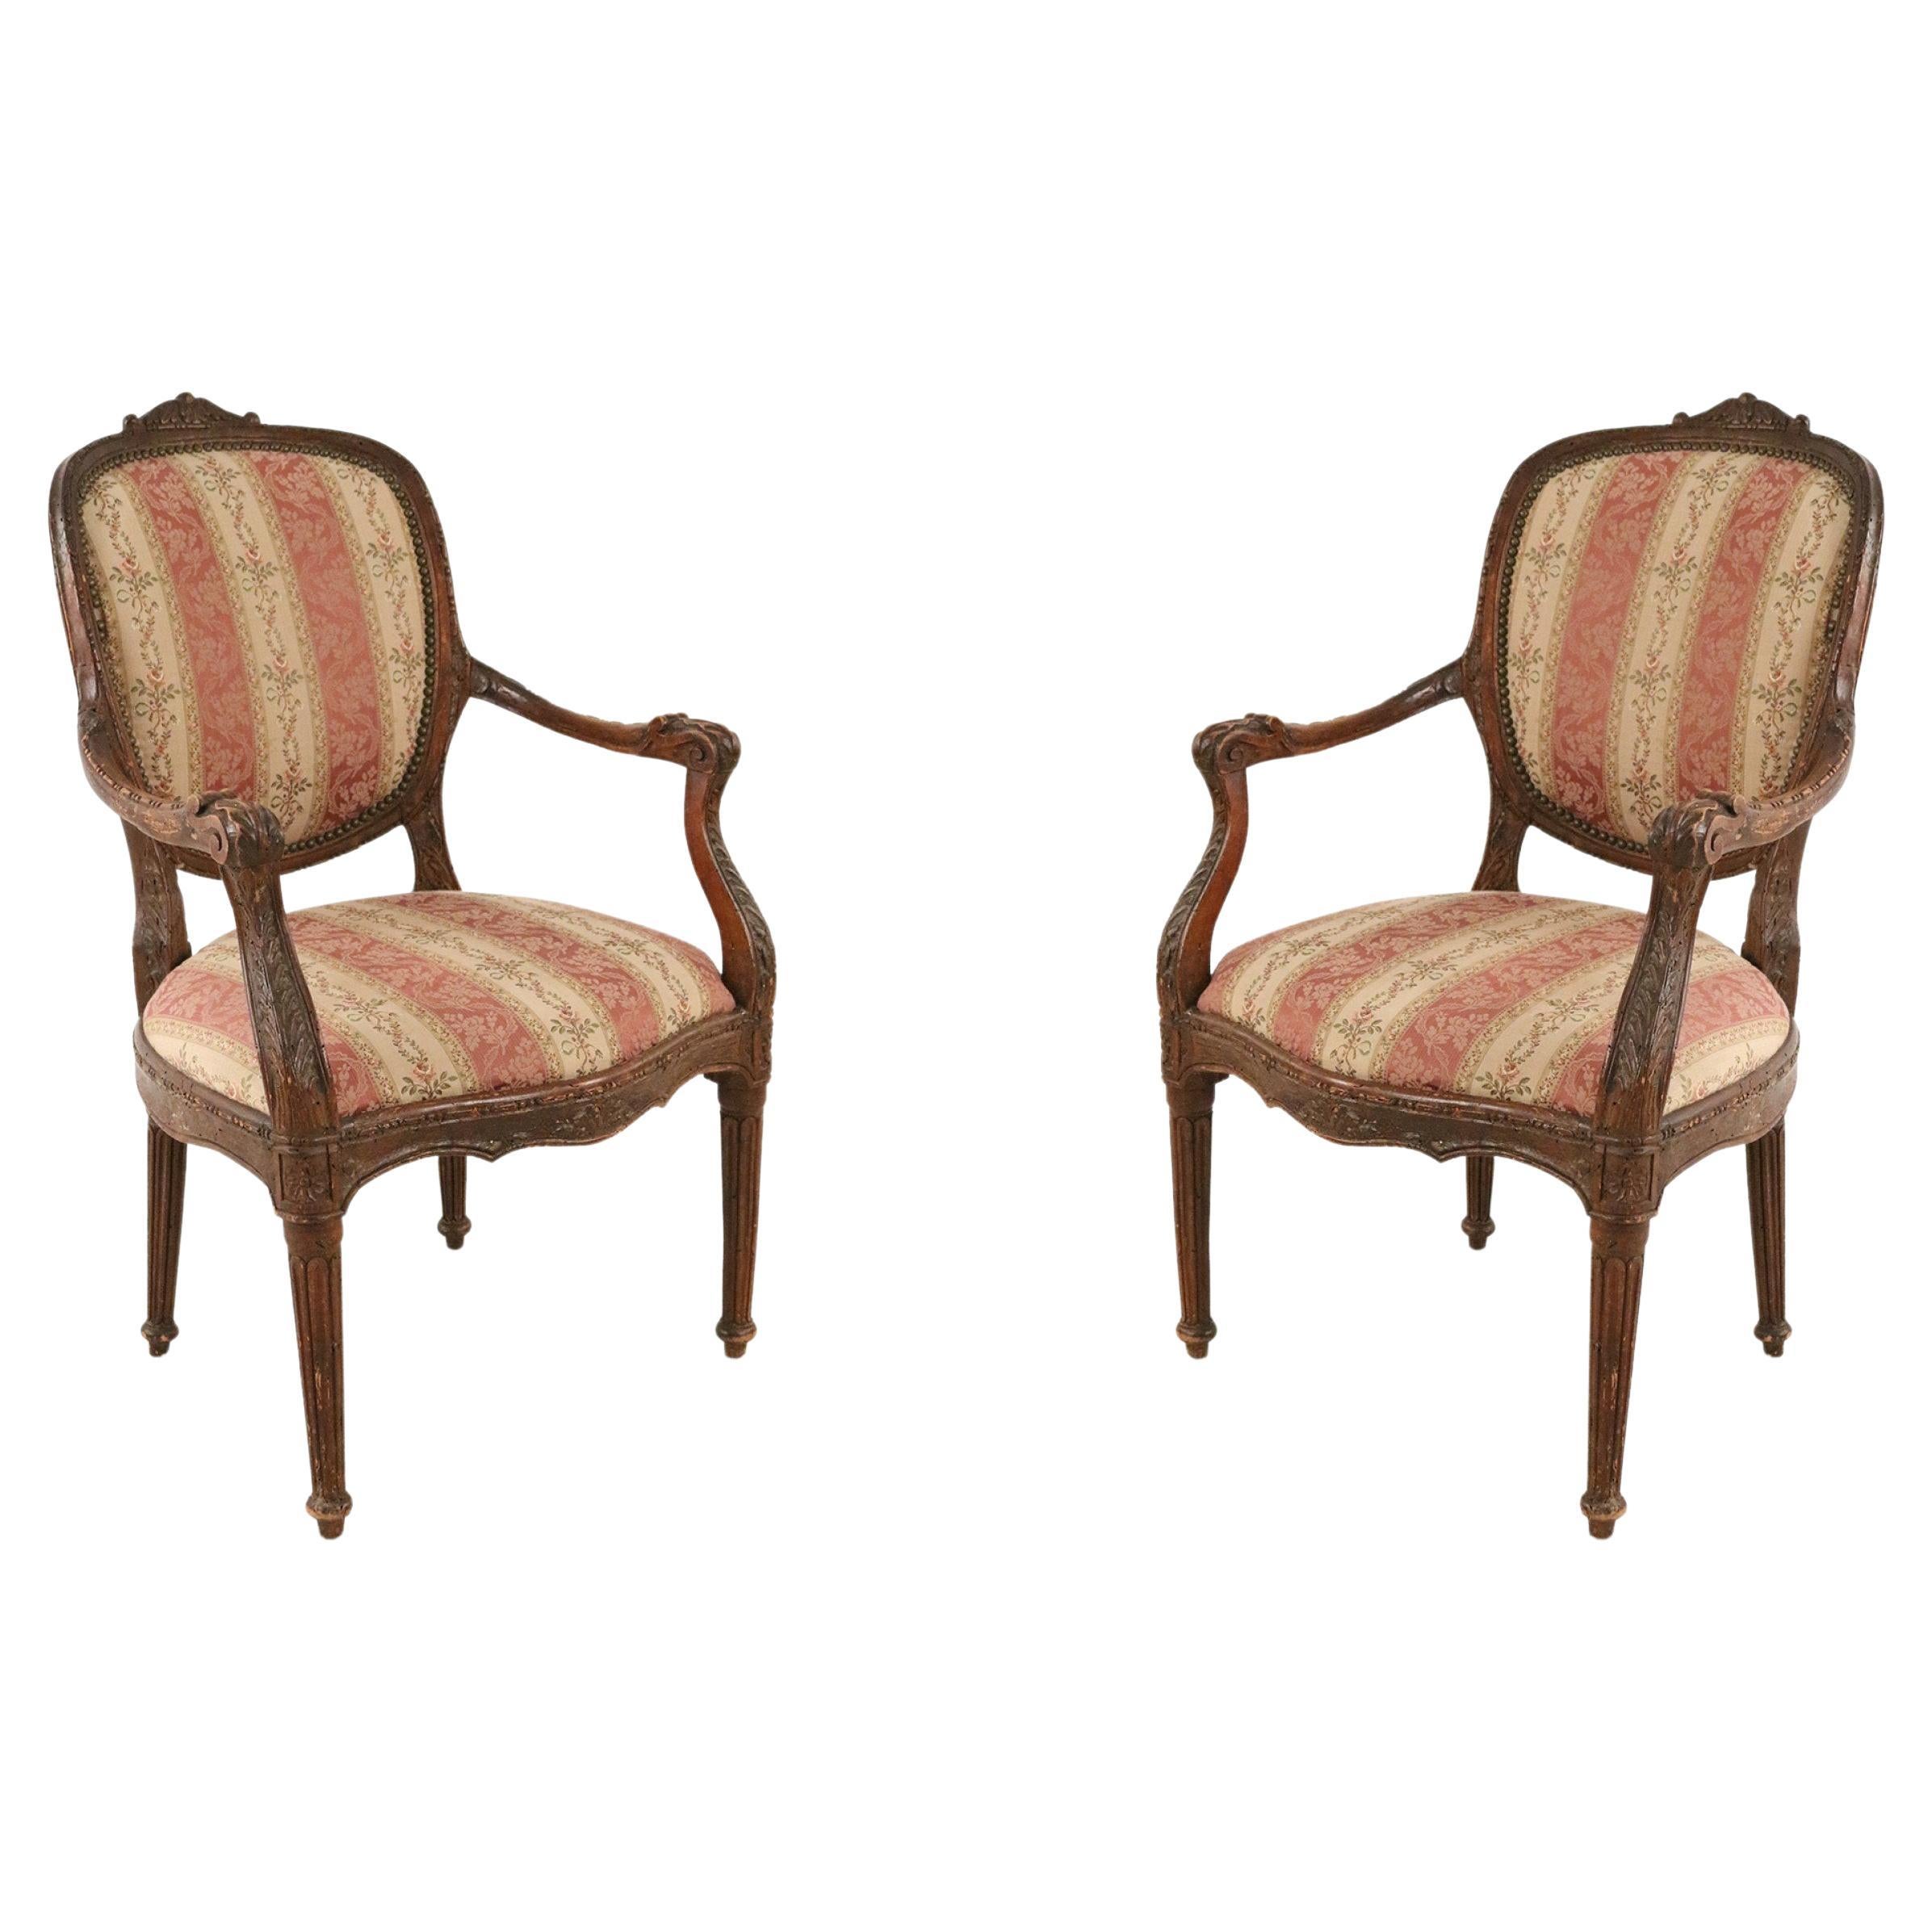 Pair of French Louis XVI Style Beige and Pink Stripe Upholstered Armchairs